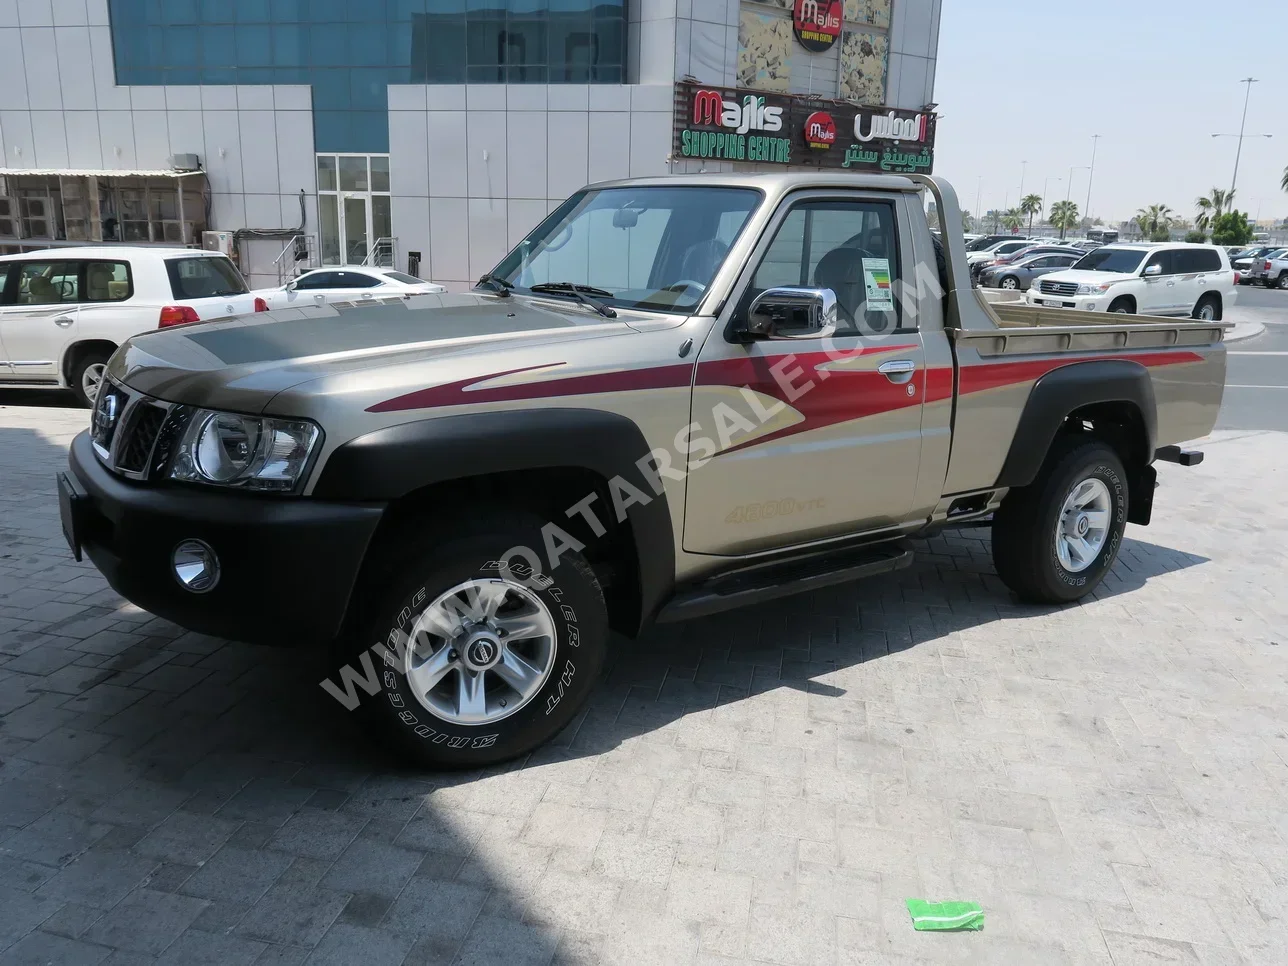 Nissan  Patrol  Pickup  2021  Manual  0 Km  6 Cylinder  Four Wheel Drive (4WD)  Pick Up  Gold  With Warranty